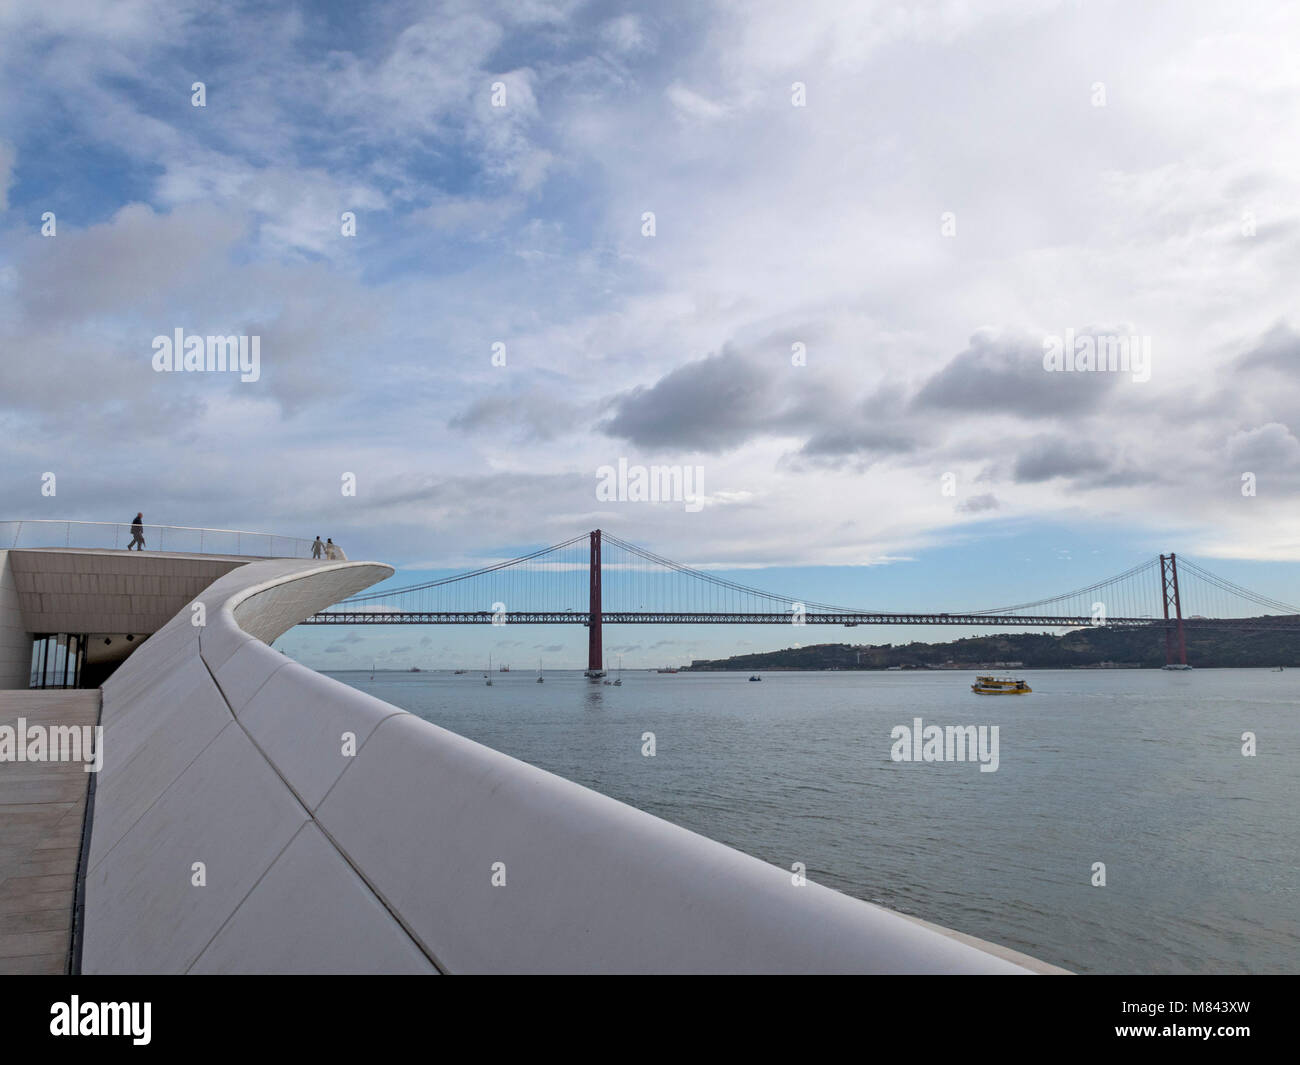 MAAT Museum of Art, Architecture and Technology by architect Amanda Levent, Tagus river and the 25 de Abril bridge, Lisbon, Portugal, Europe Stock Photo